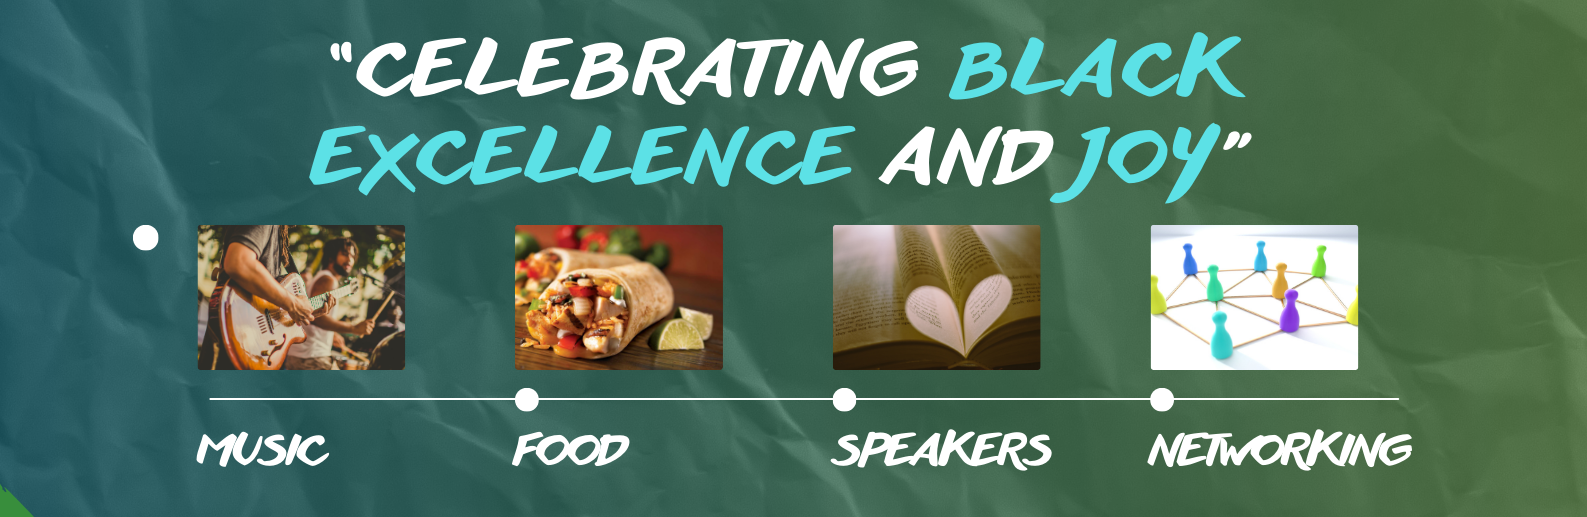 Test on green background reads "Celebrating Black excellence and joy" Labelled images of Music, Food, Speakers, Networking.